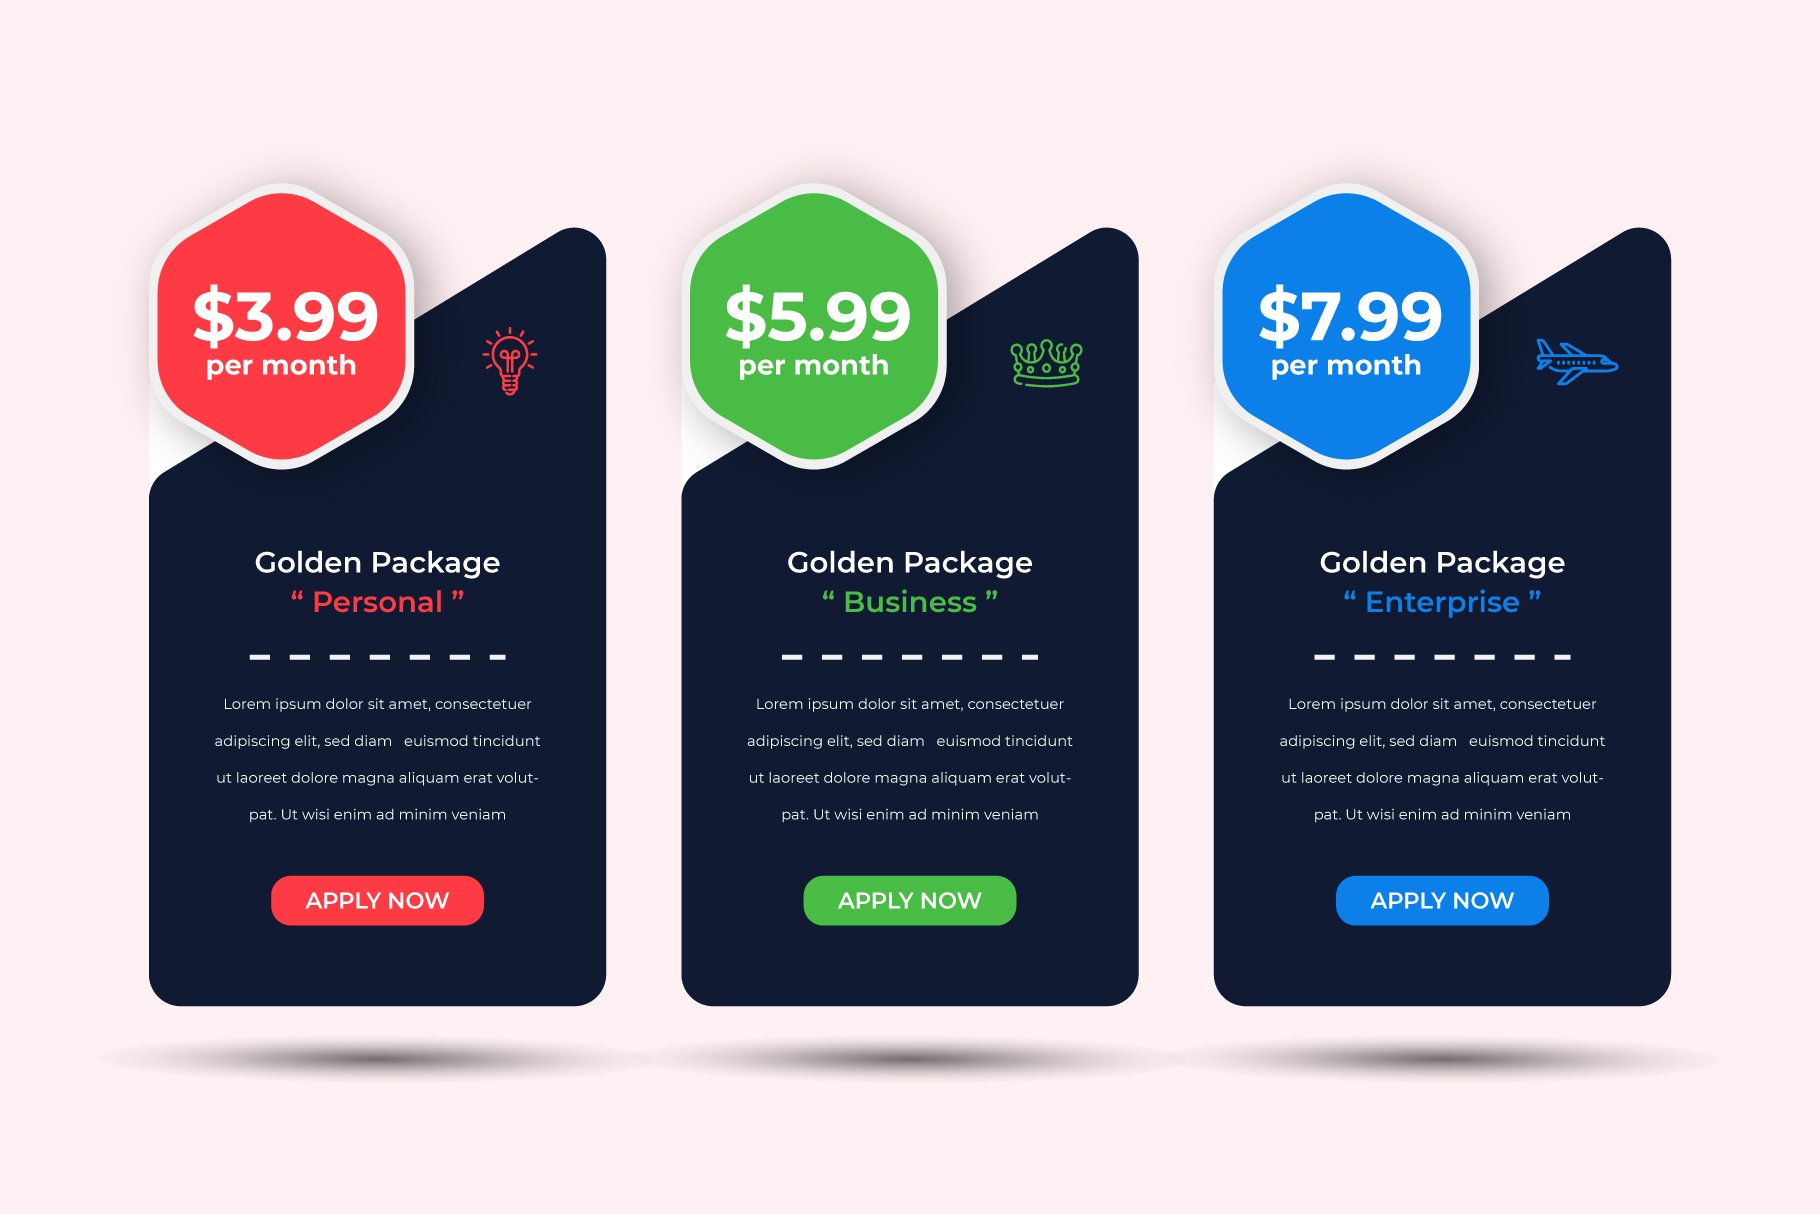 Pricing Table cover image.